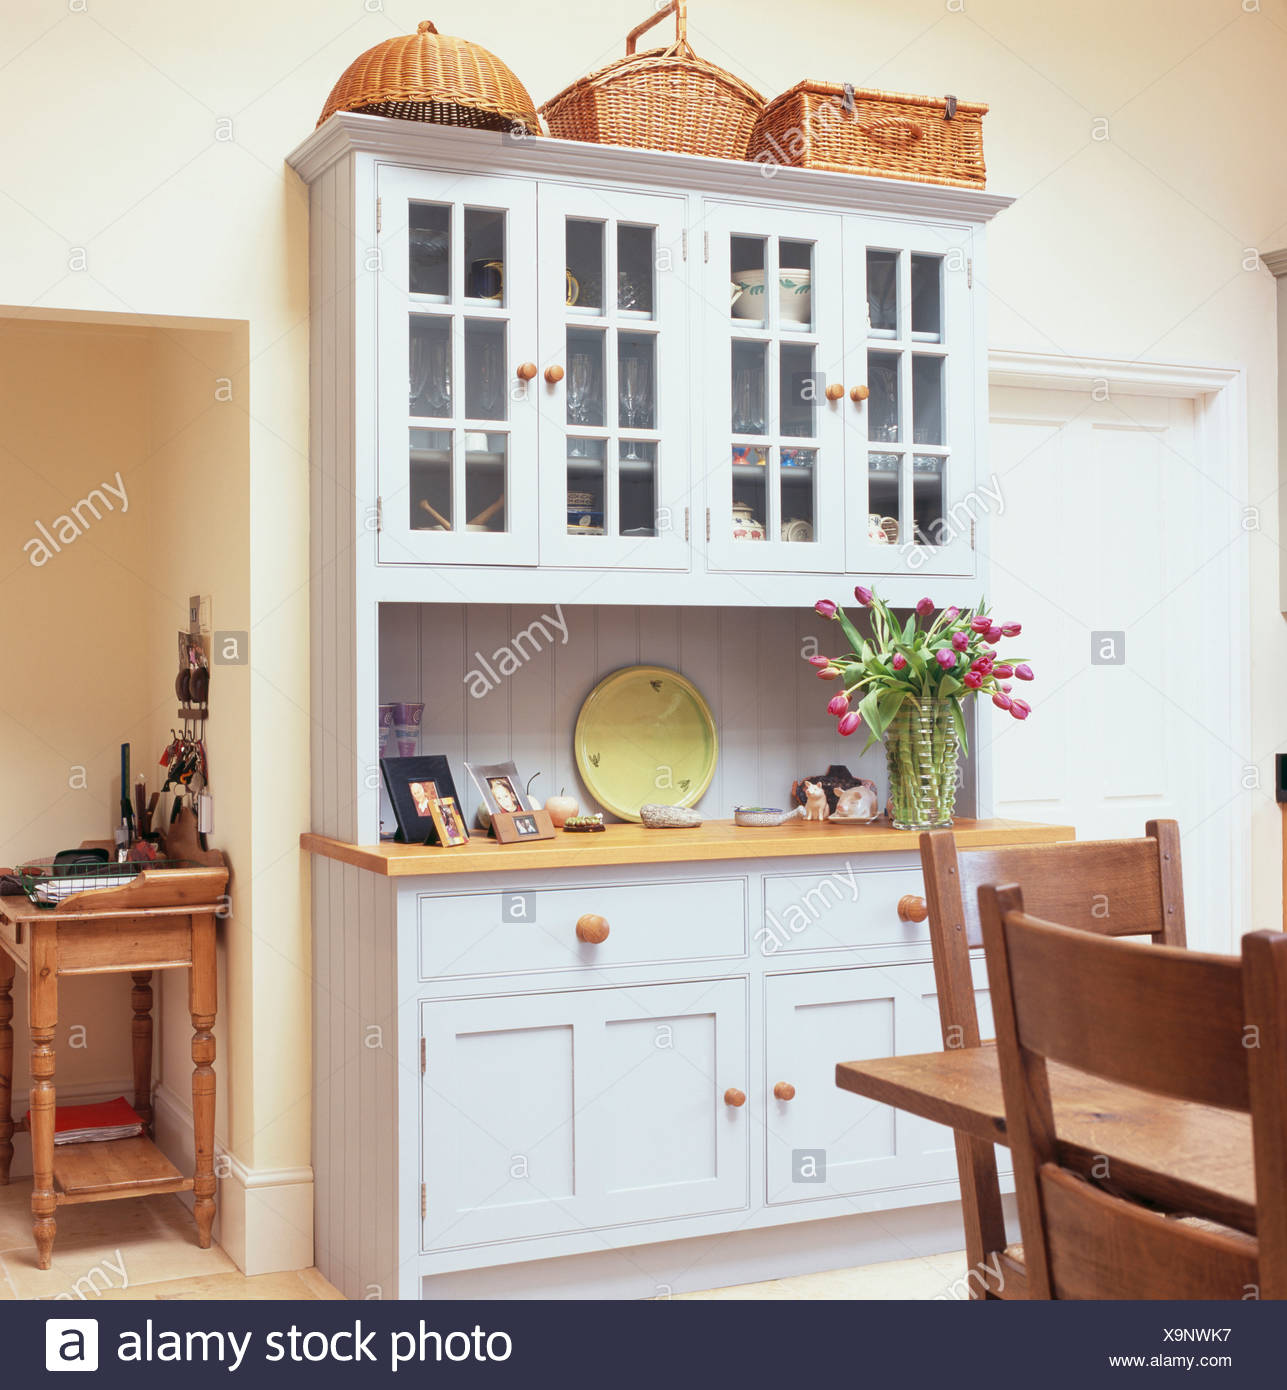 Close Up Of Built In White Painted Dresser With Baskets On Top In